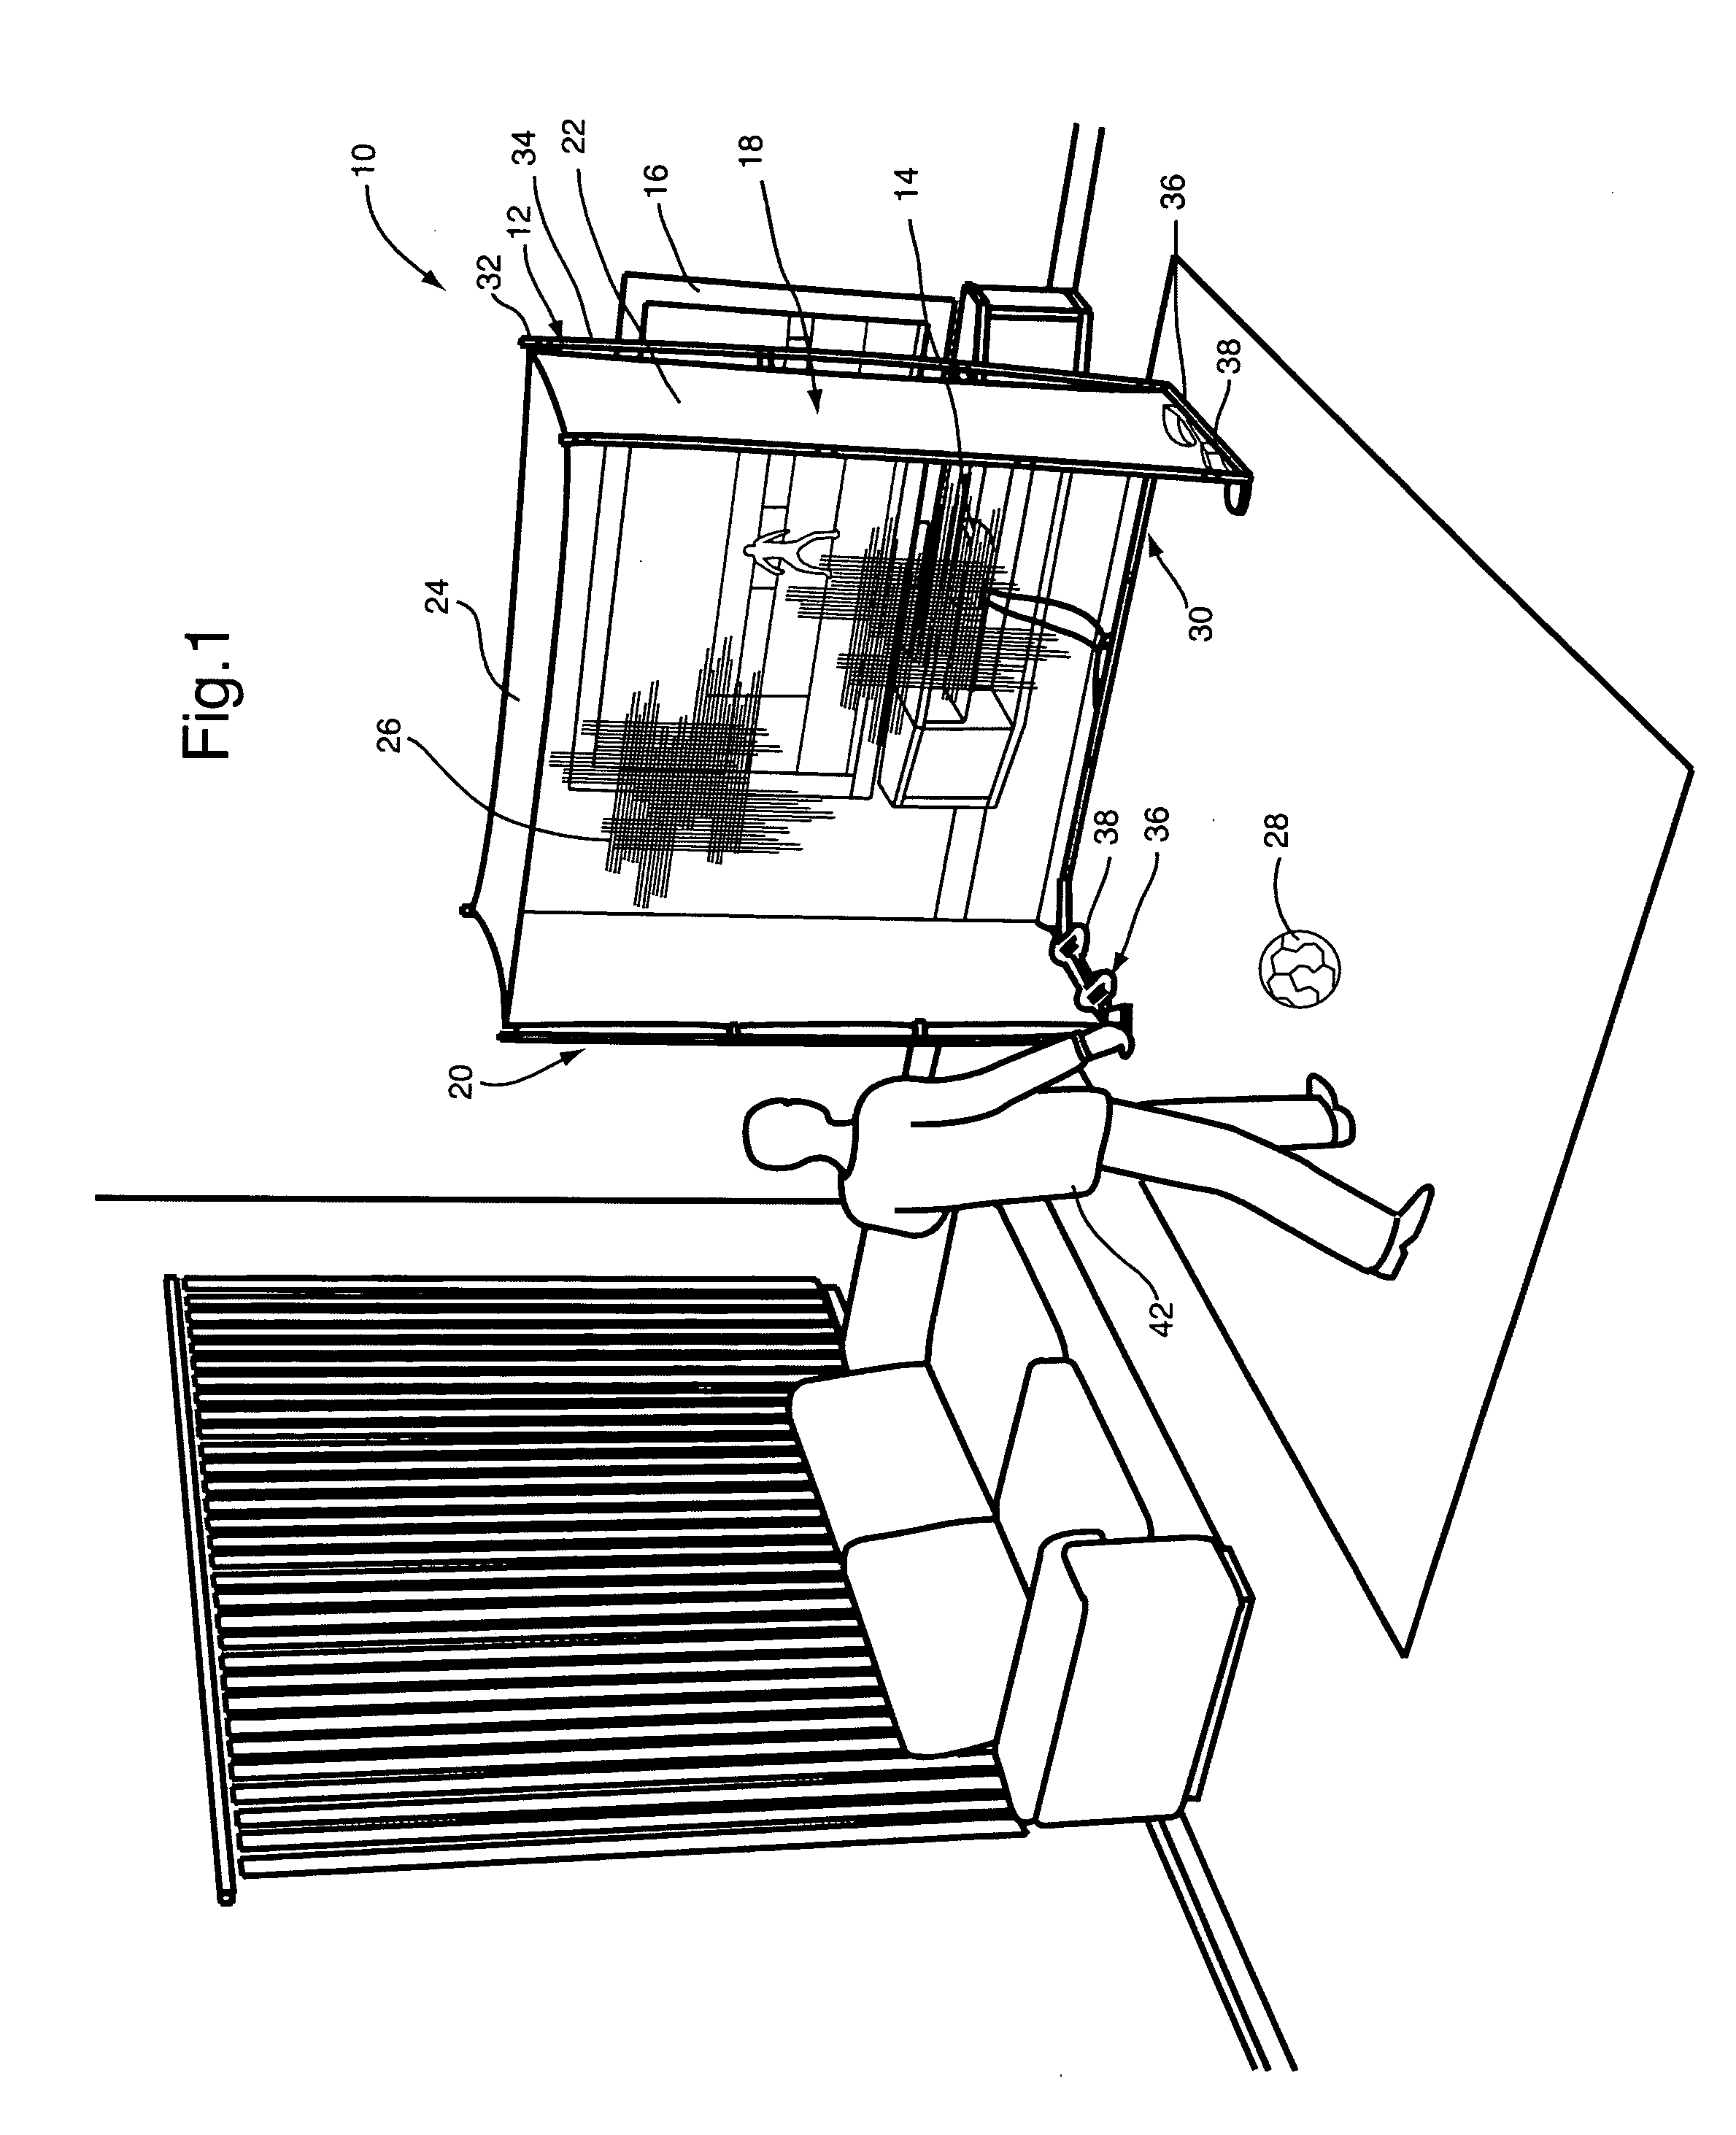 Object tracking interface device as a peripheral input device for computers or game consoles